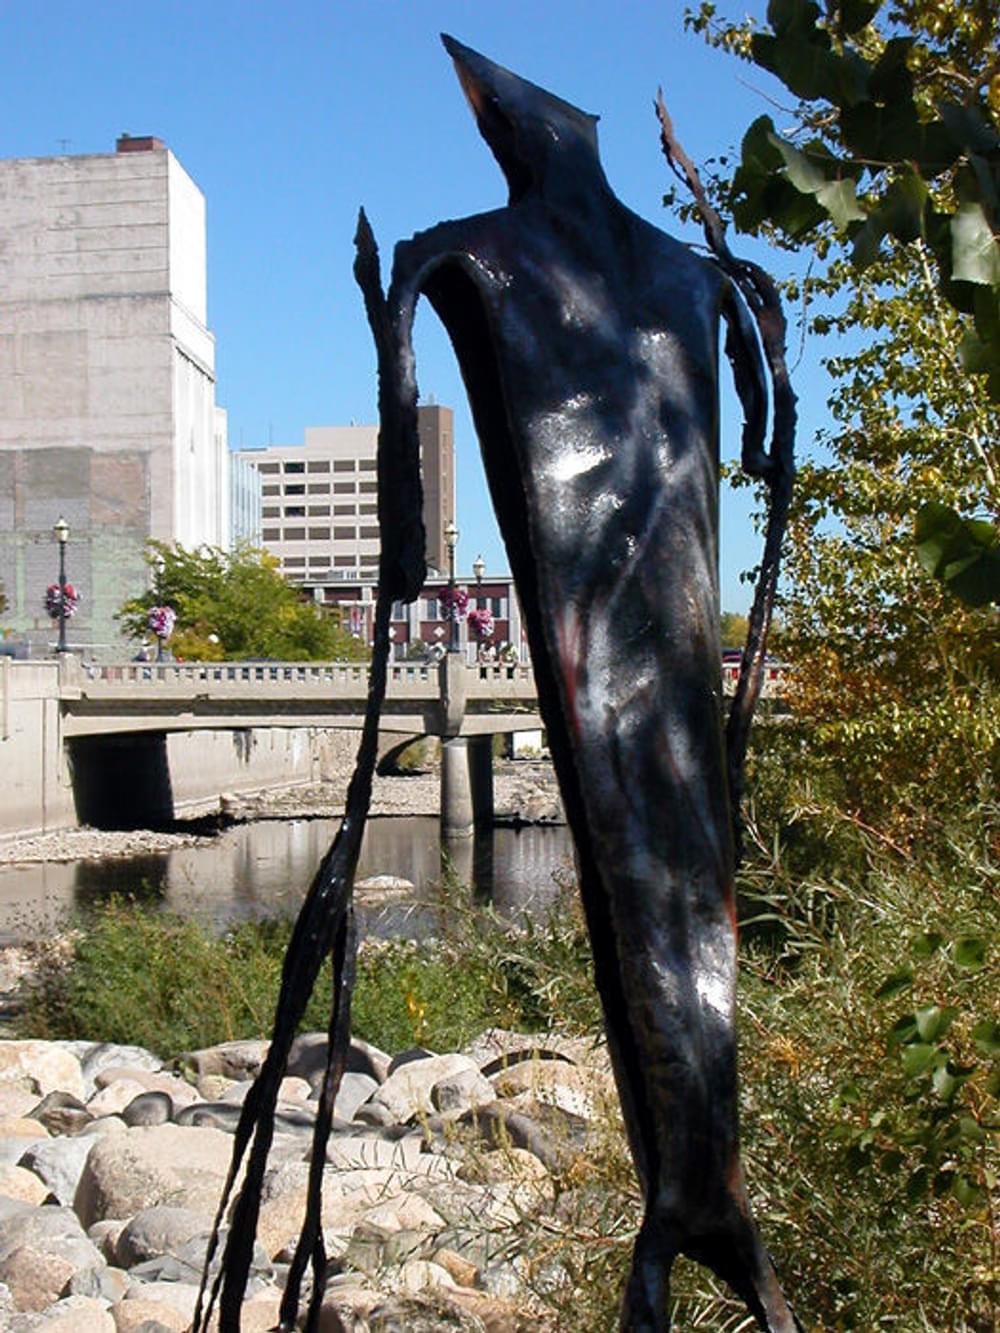 One of the large metal sculptures in the flood plain of the Truckee River in downtown Reno, Nevada. A trail on each side of the river flood wall looks down on the sculptures.